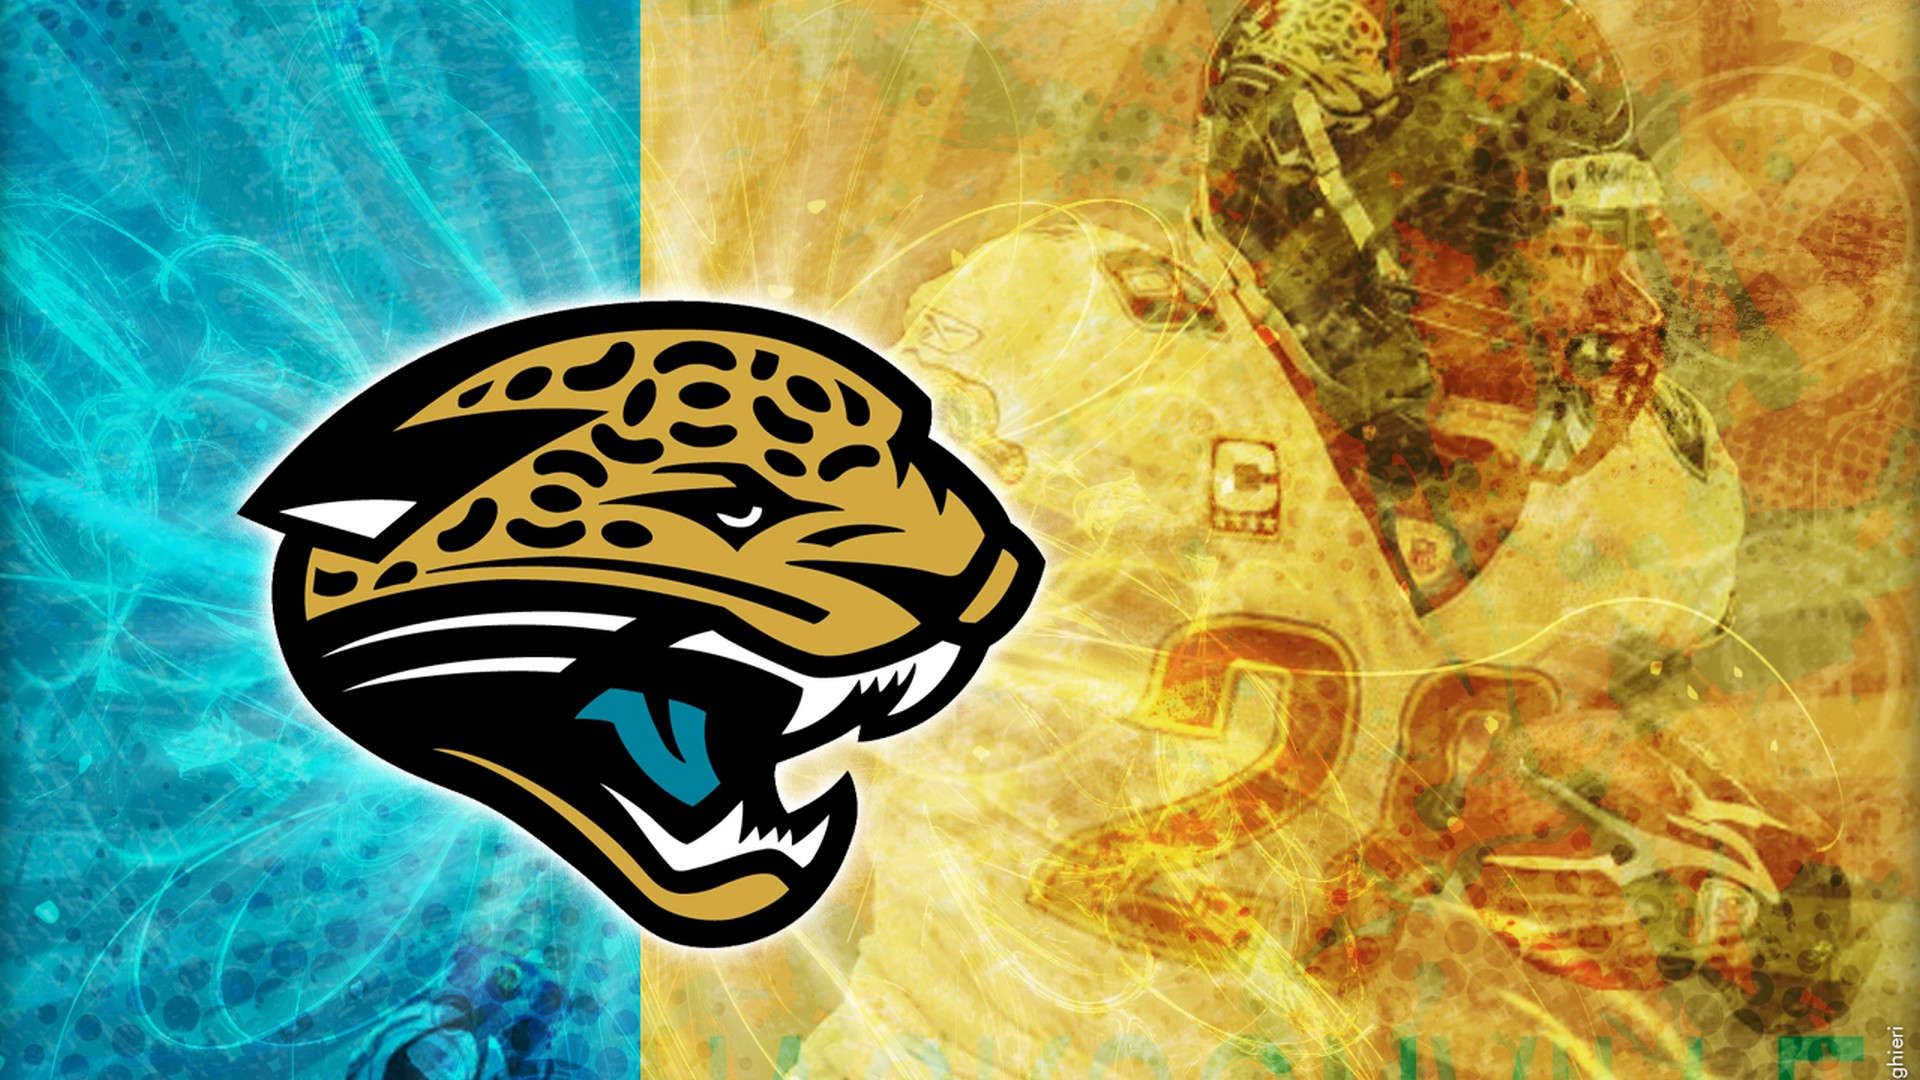 Jacksonville Jaguars Wallpaper in HD With high-resolution 1920X1080 pixel. Download and set as wallpaper for Desktop Computer, Apple iPhone X, XS Max, XR, 8, 7, 6, SE, iPad, Android